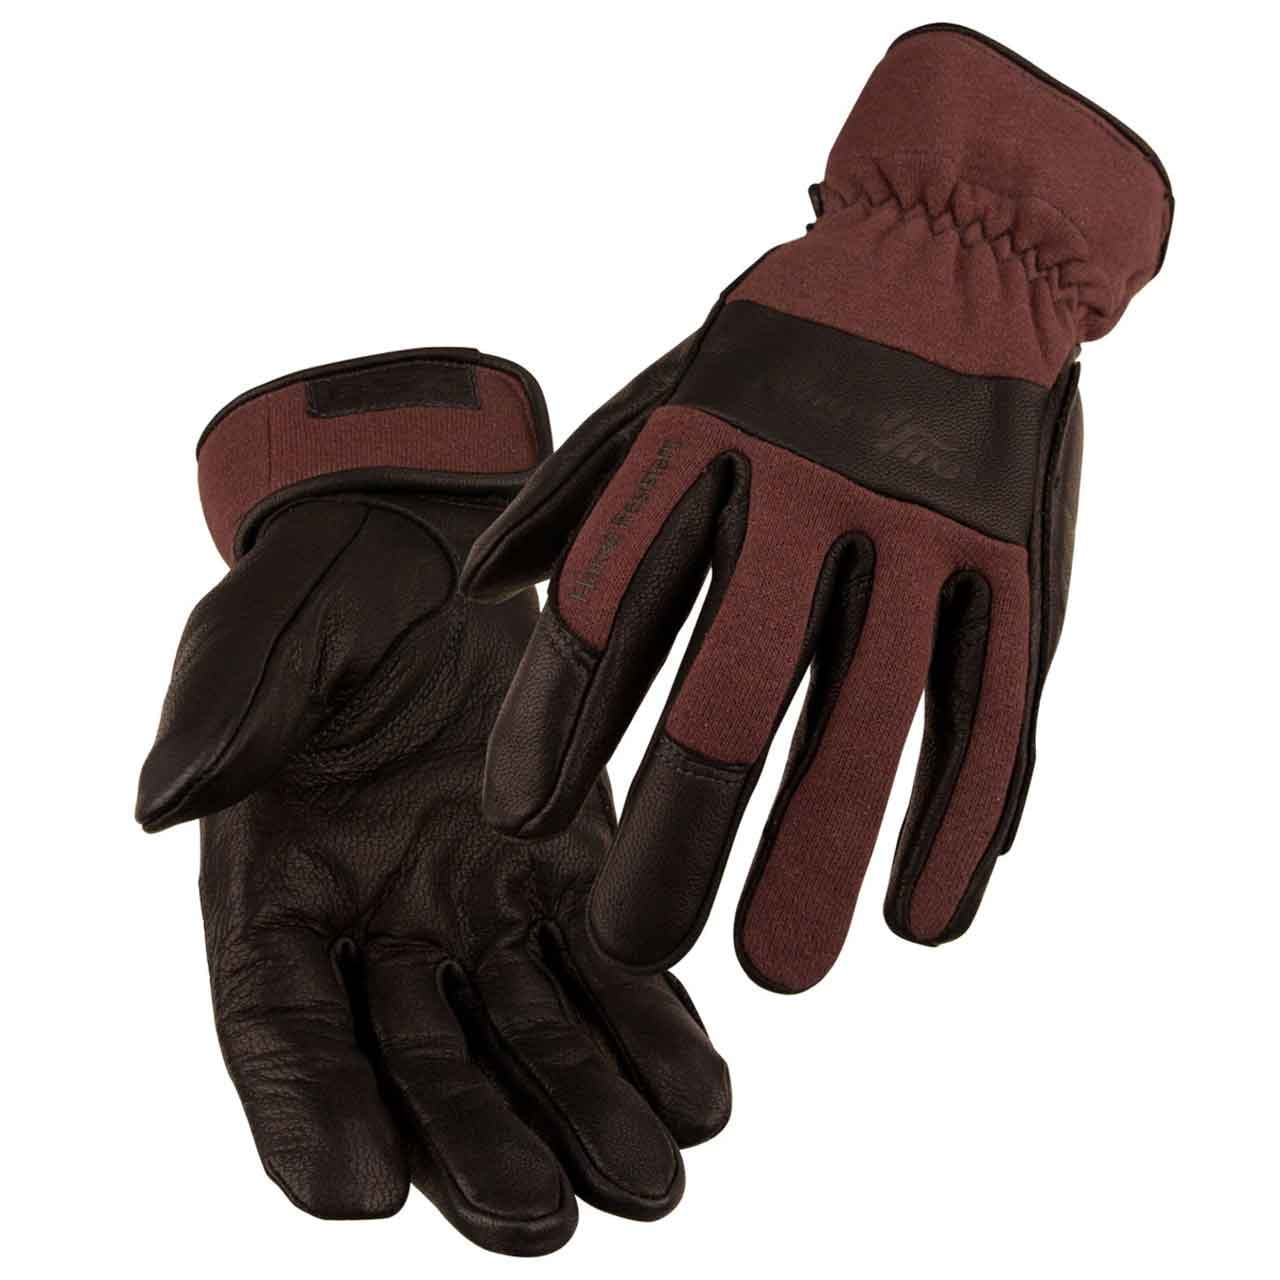 Grill Gloves Size Medium Unlined New Large 1 Pair 100% Soft Leather Welding 